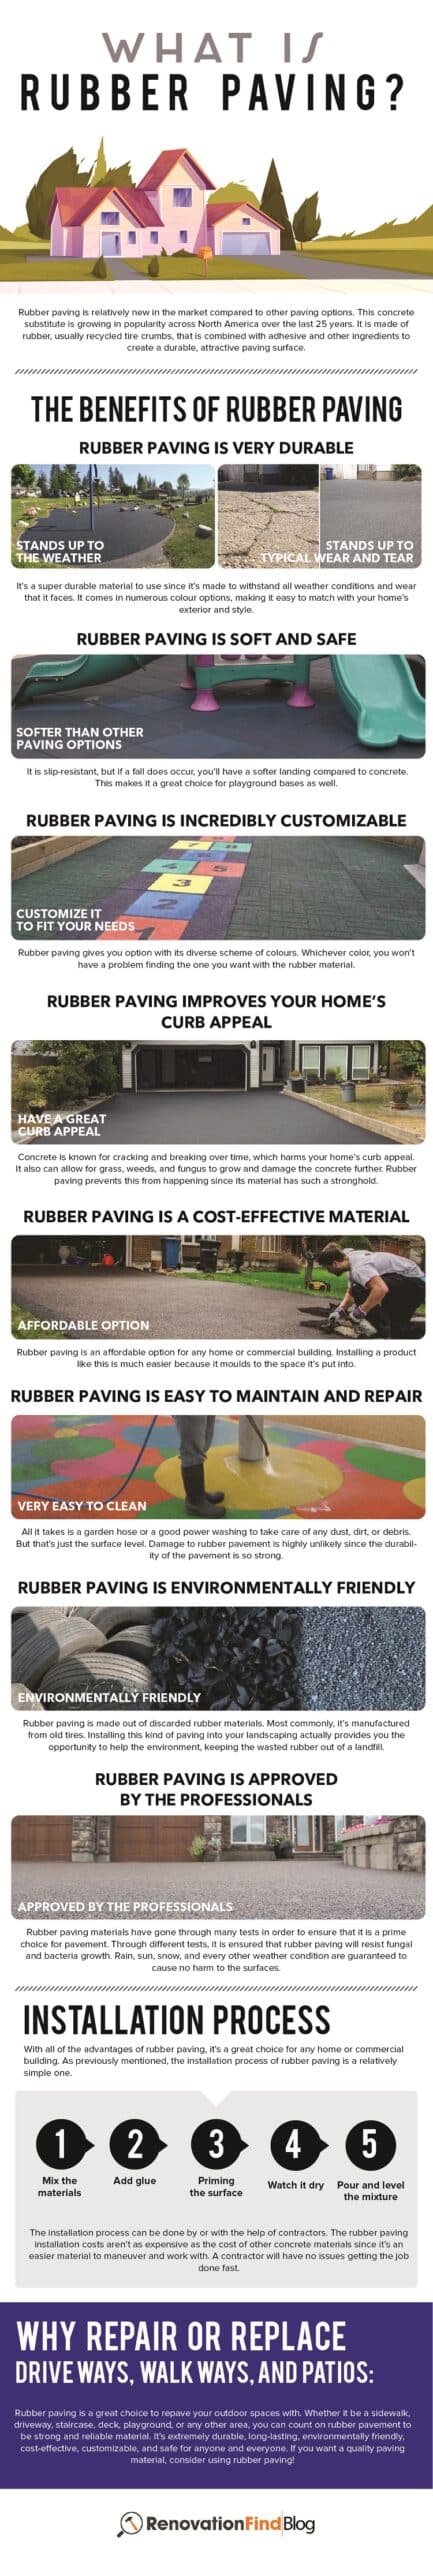 Infographic - What is Rubber Paving